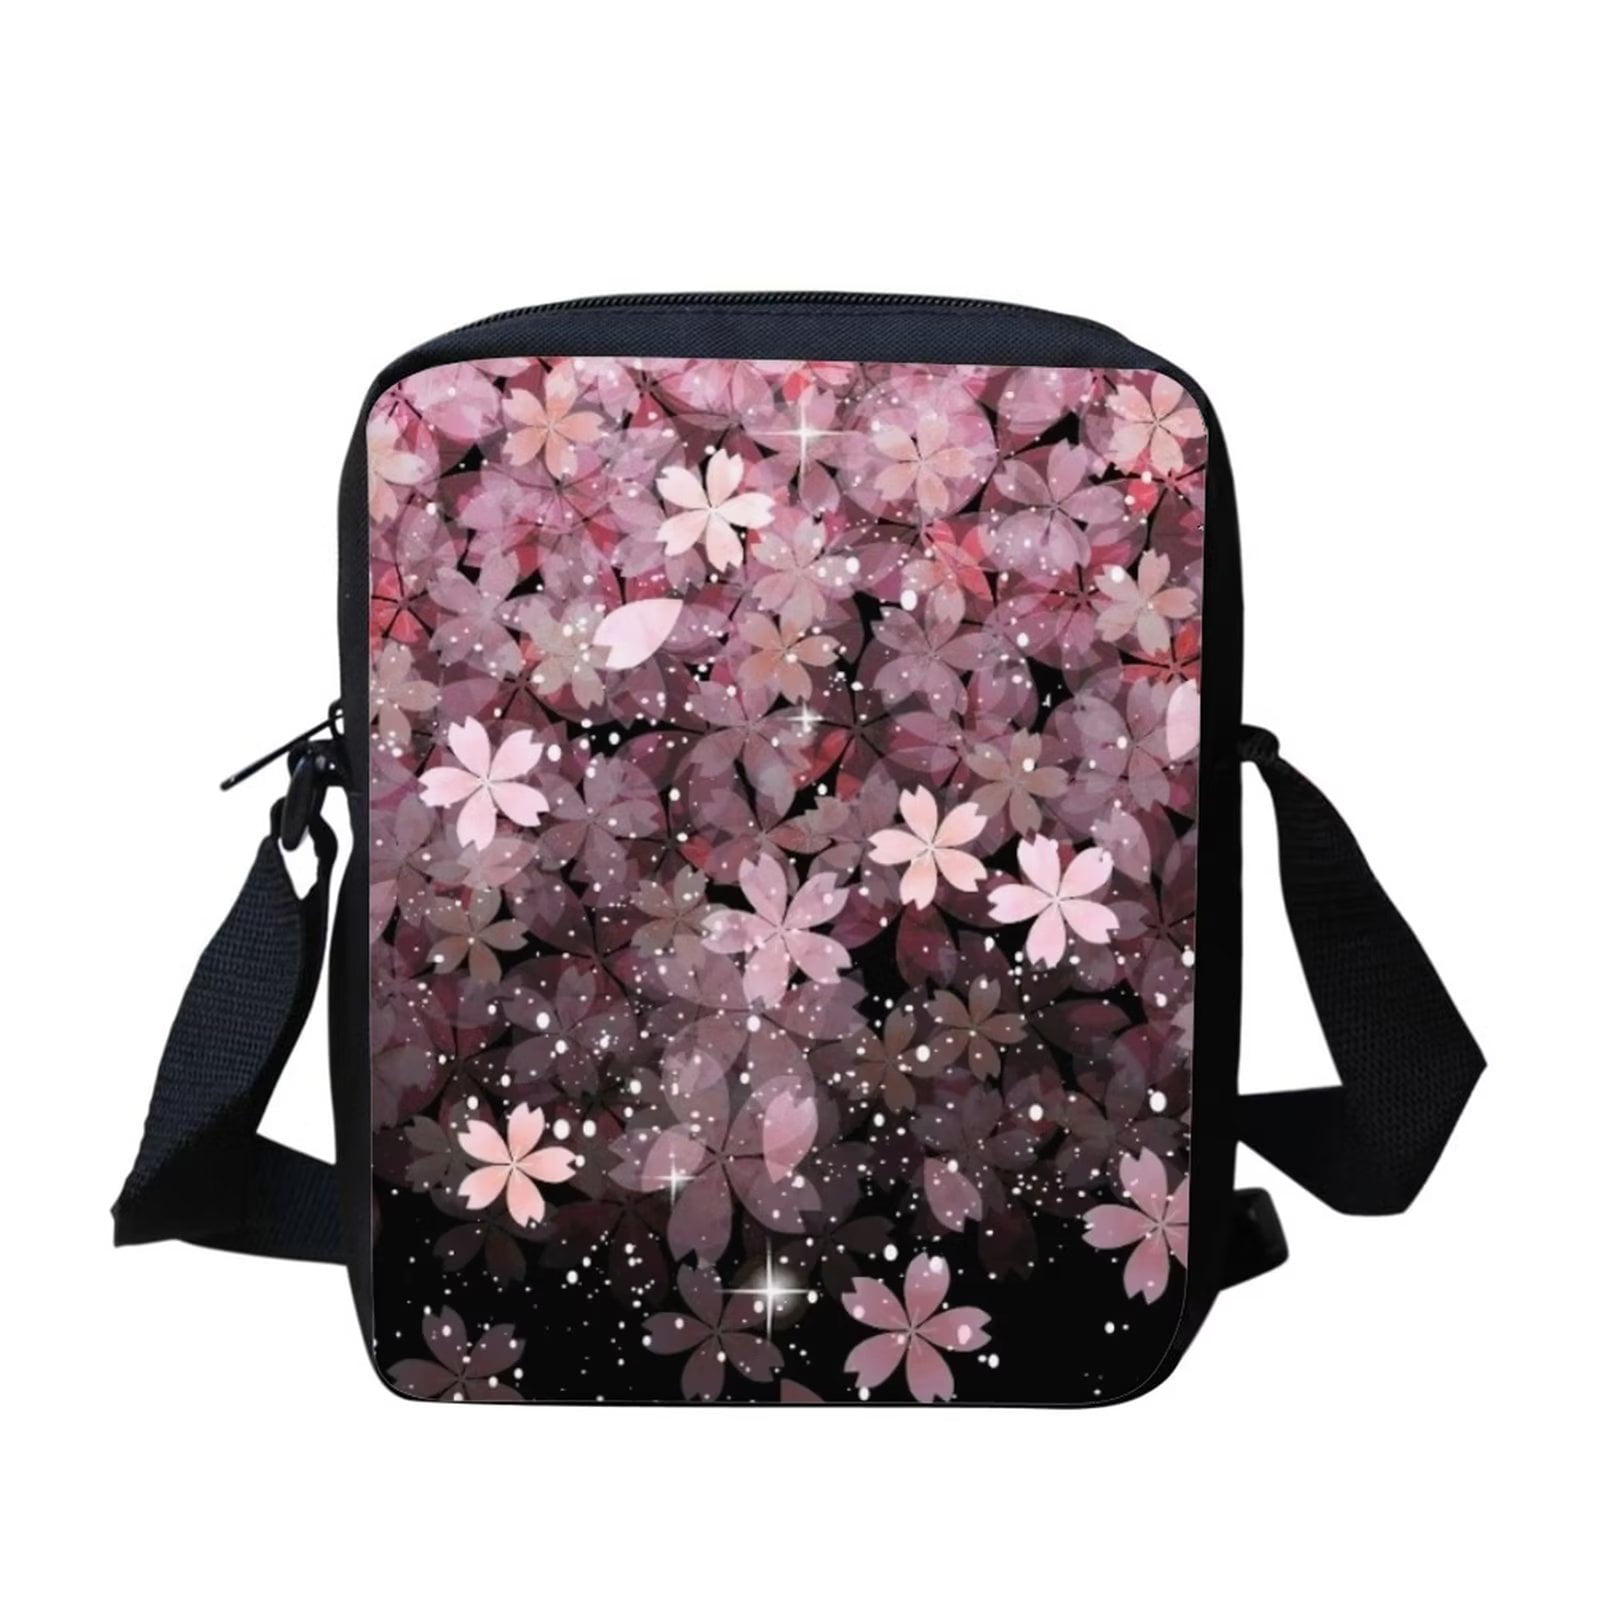 leikya 🌿 on X: another upcoming bag design - cherry blossom this time 🌸✨   / X